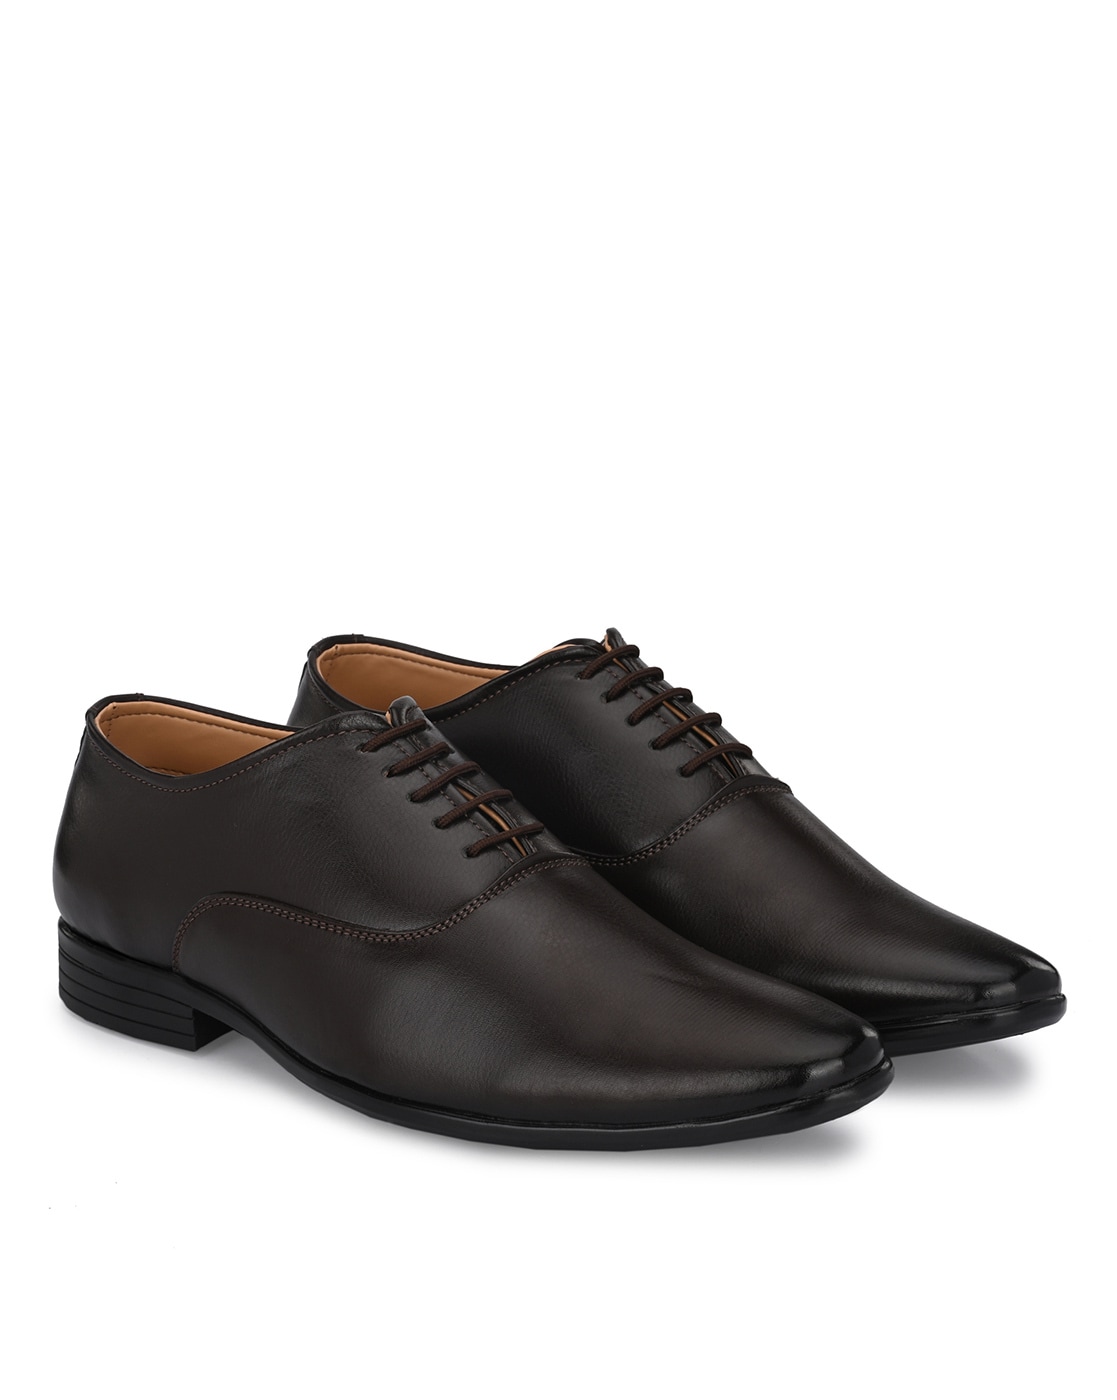 What's the best leather for Shoes Upper, Lining and Sole? - BuyLeatherOnline